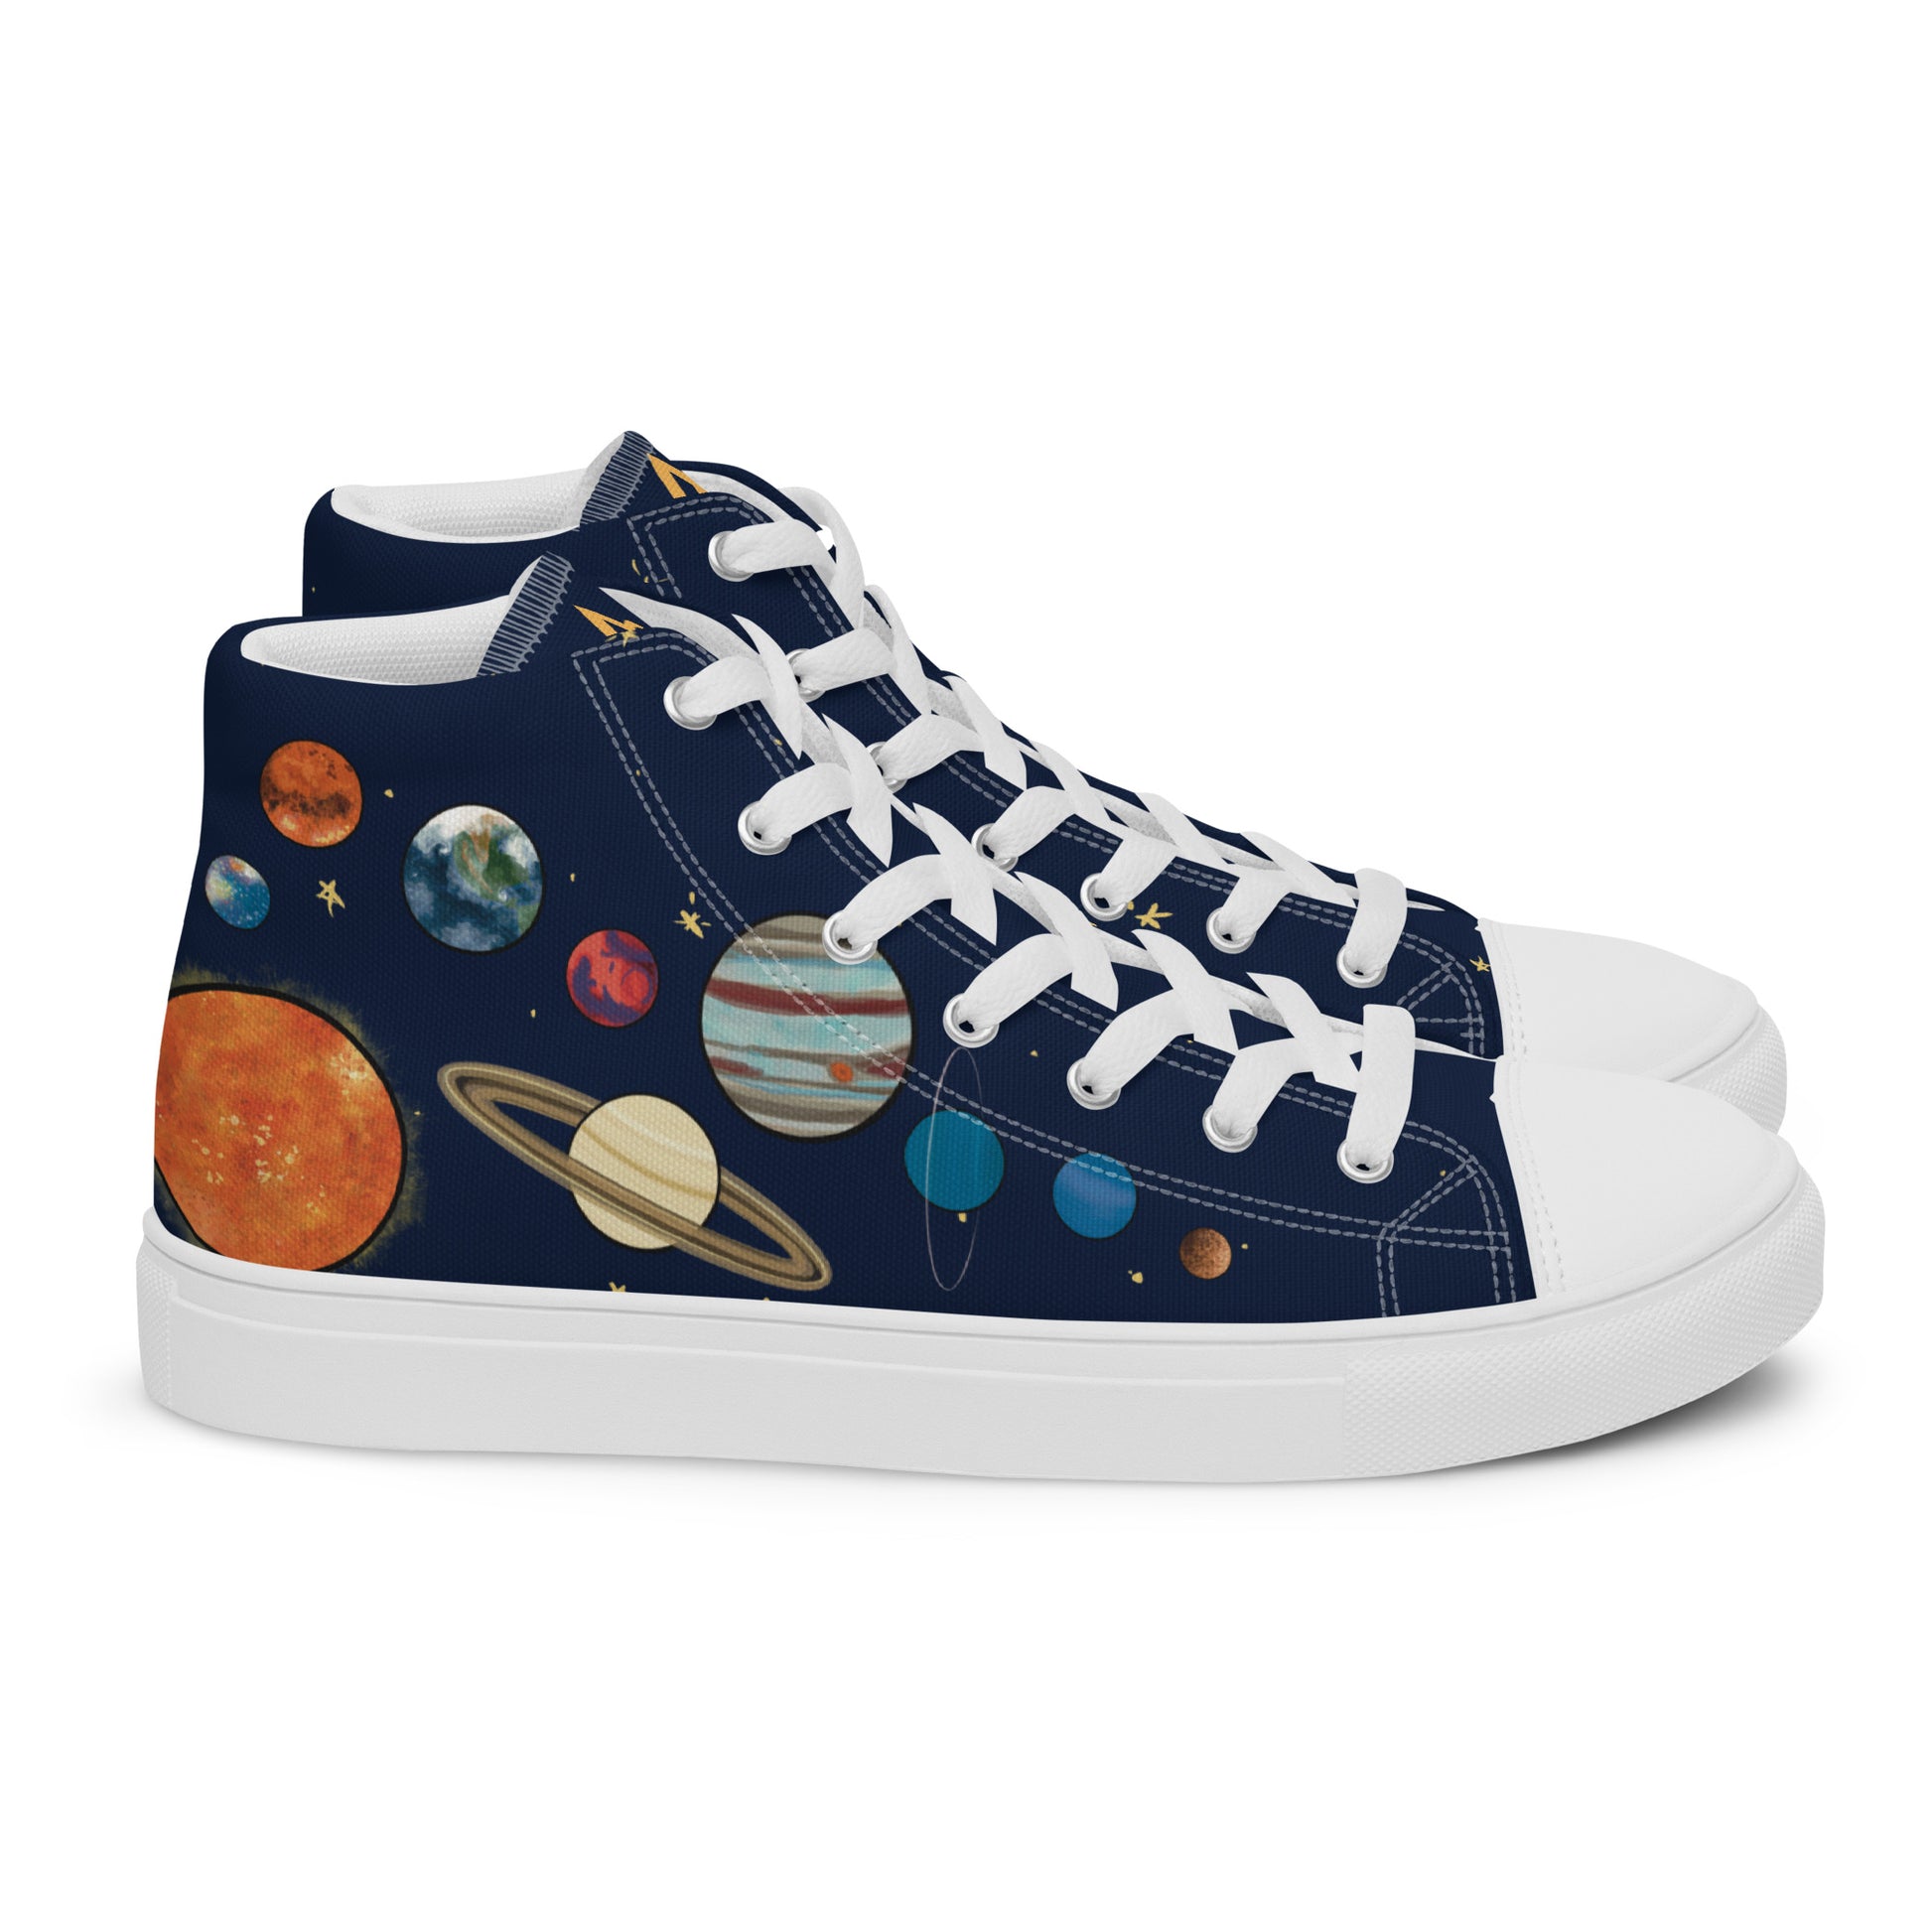 Right view: A pair of high top shoes with painted solar system and starry background with white laces.